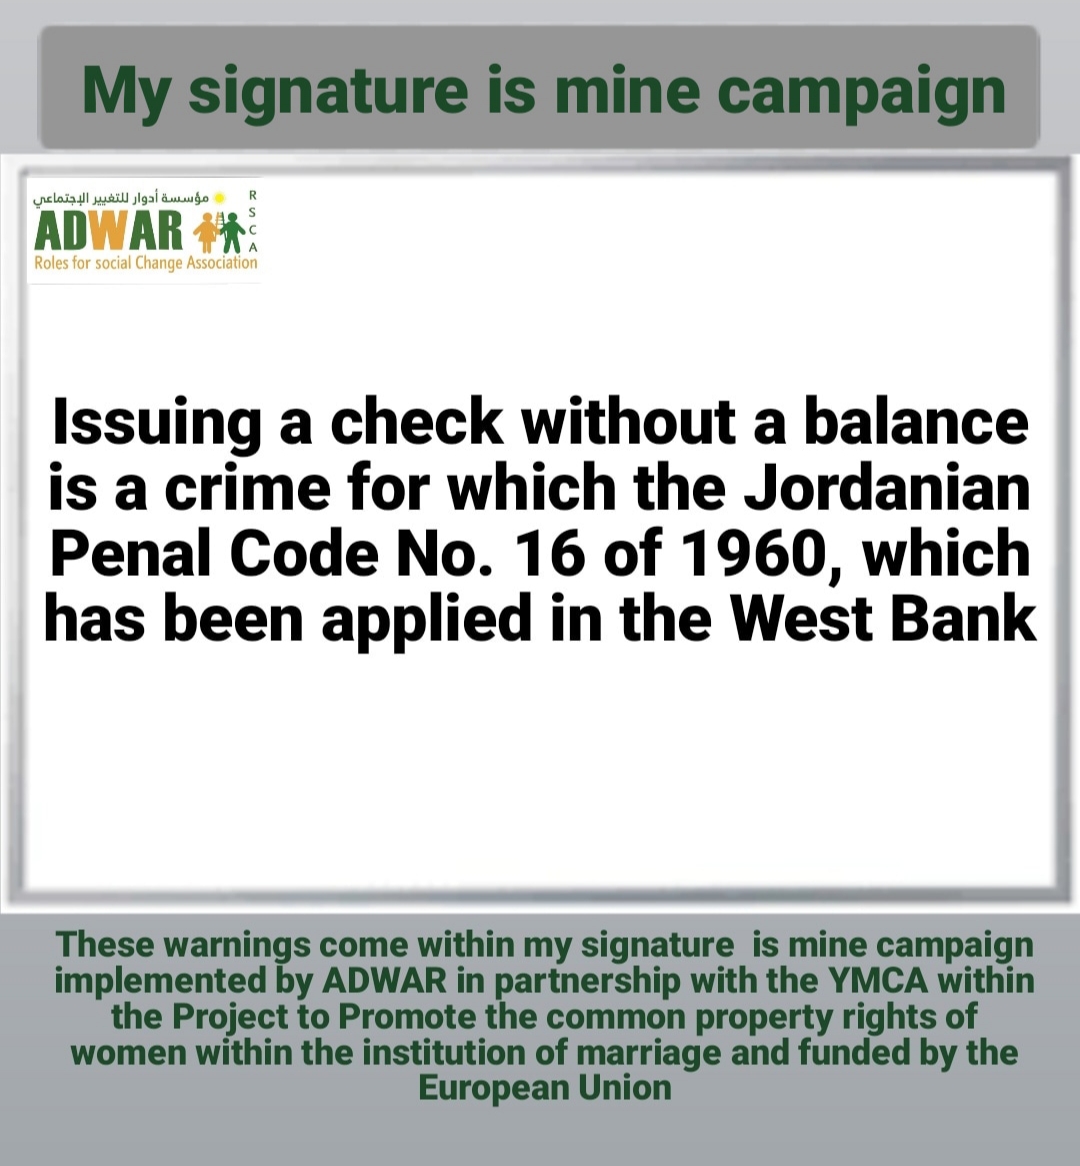  Message # 1  Awareness of the punishment for signing checks